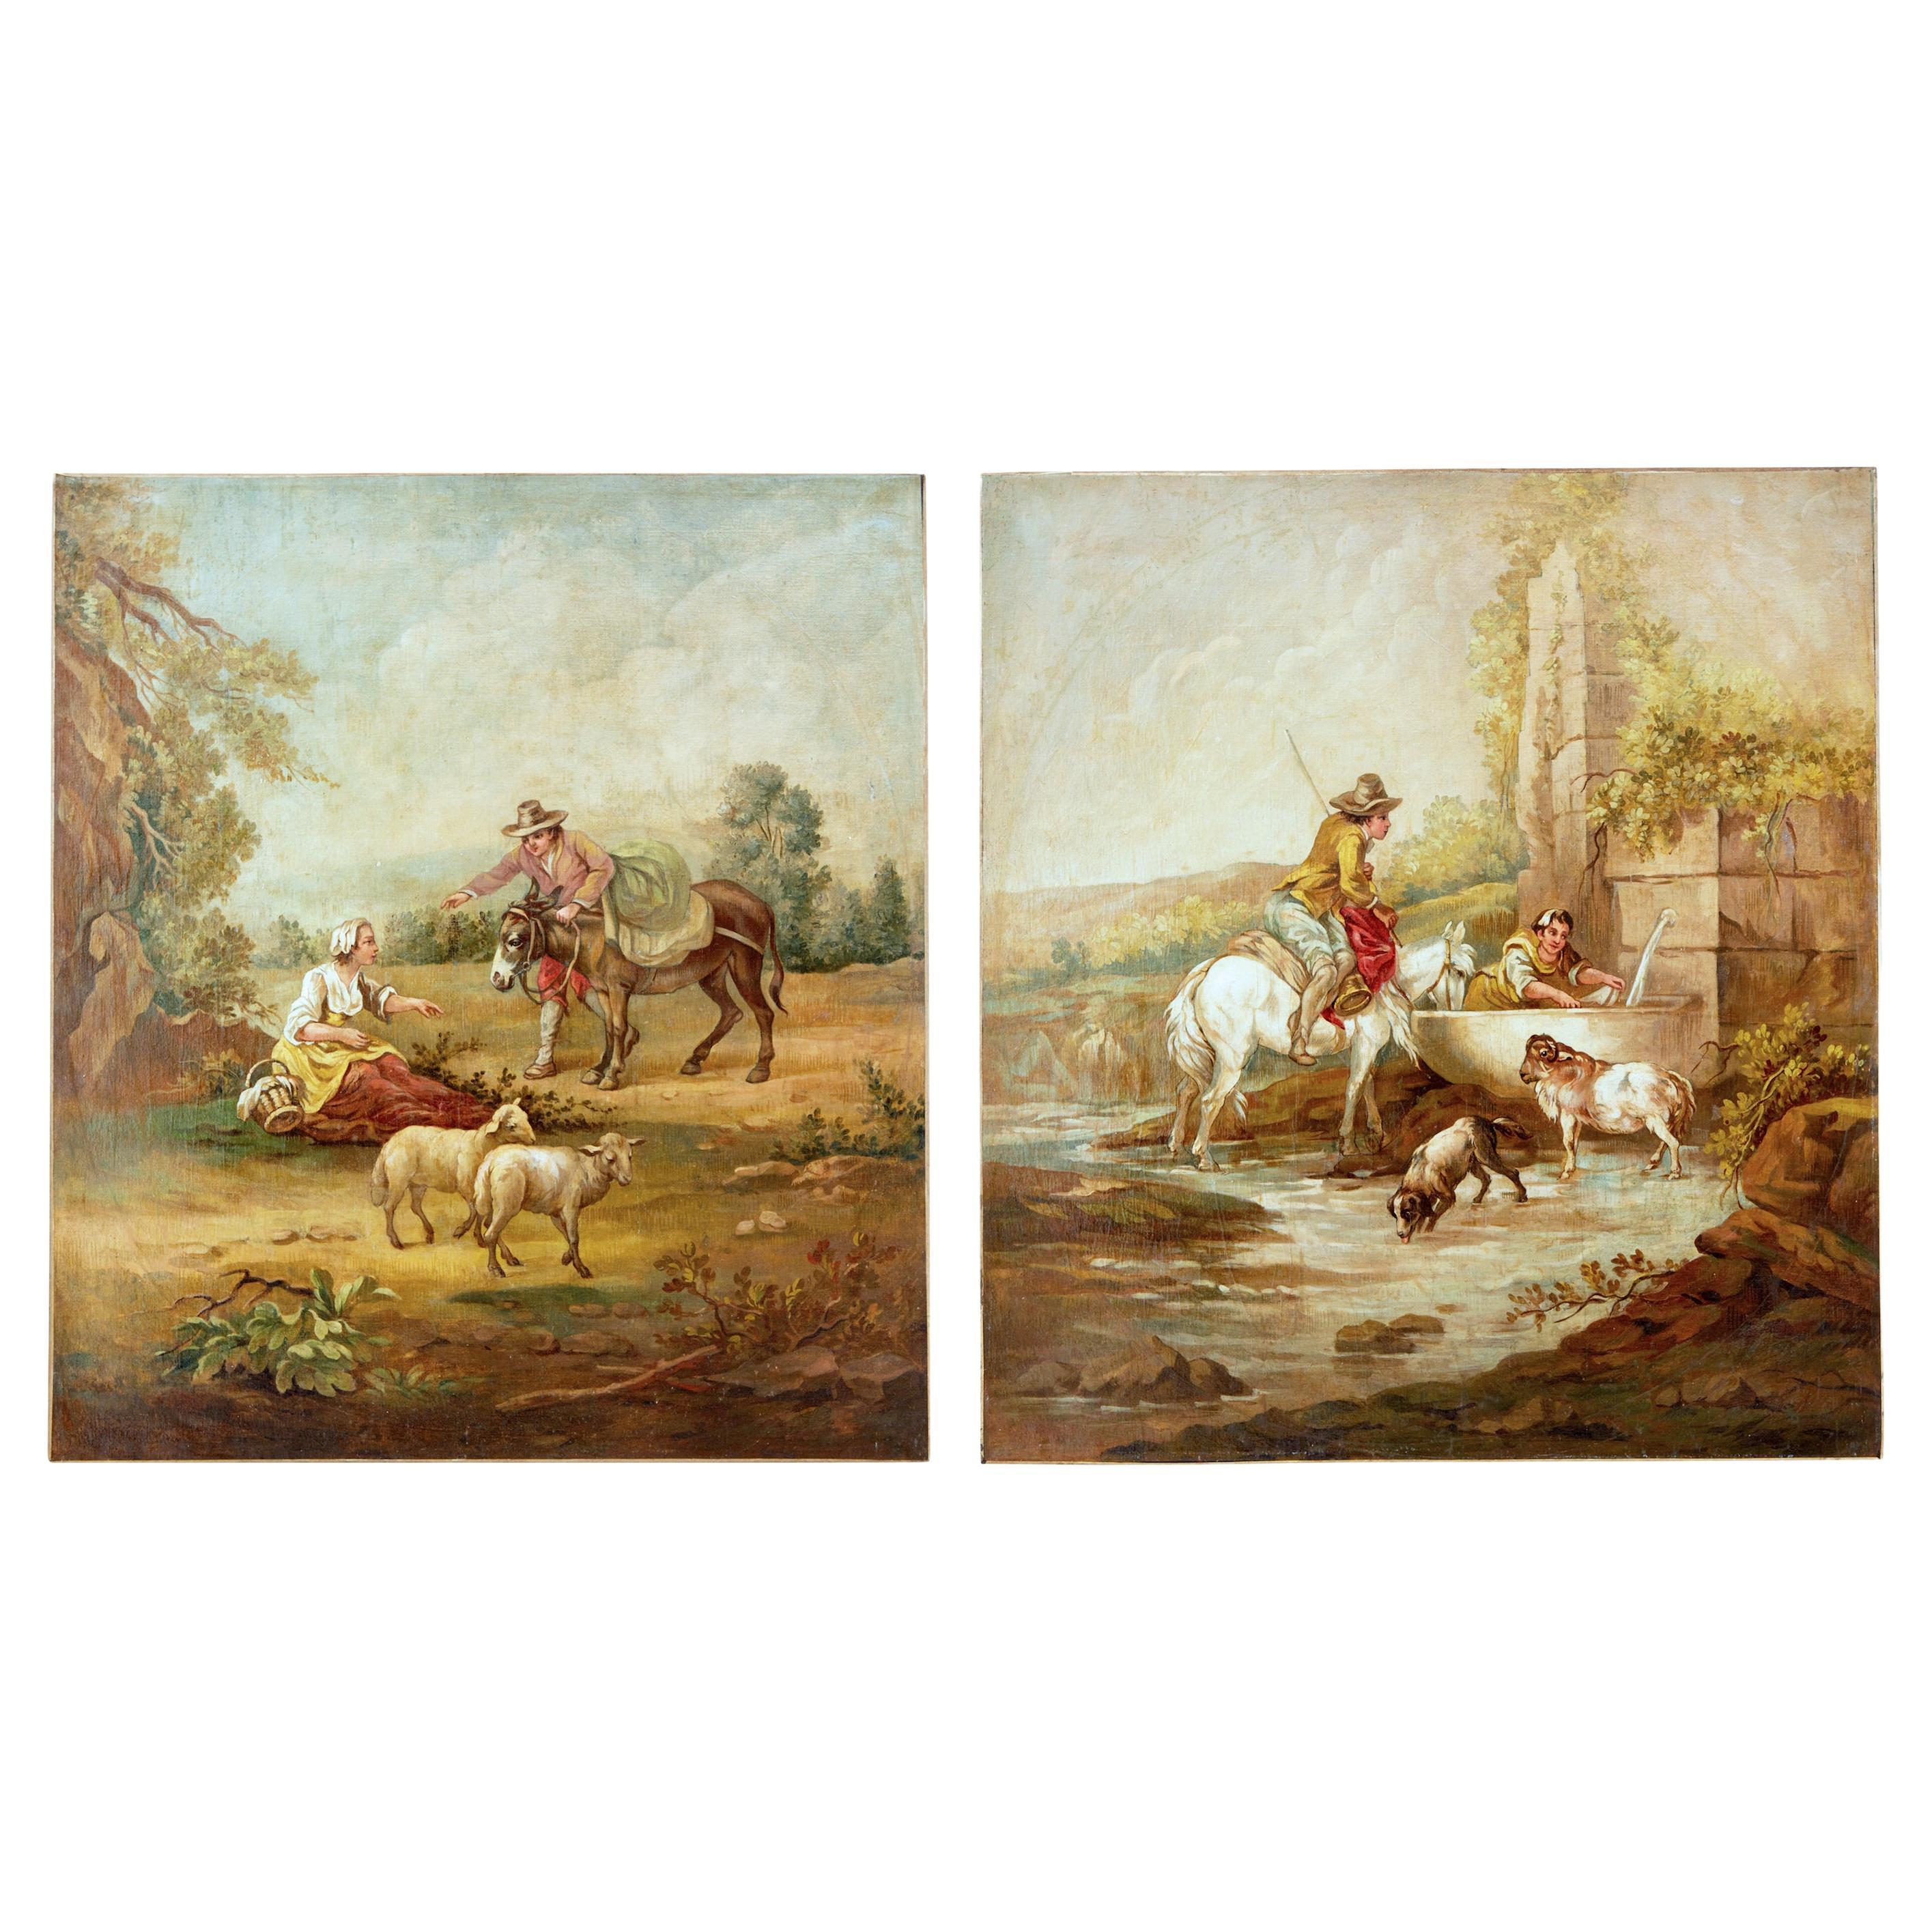 Pair of Rural Late 19th Century Oil on Canvas Paintings